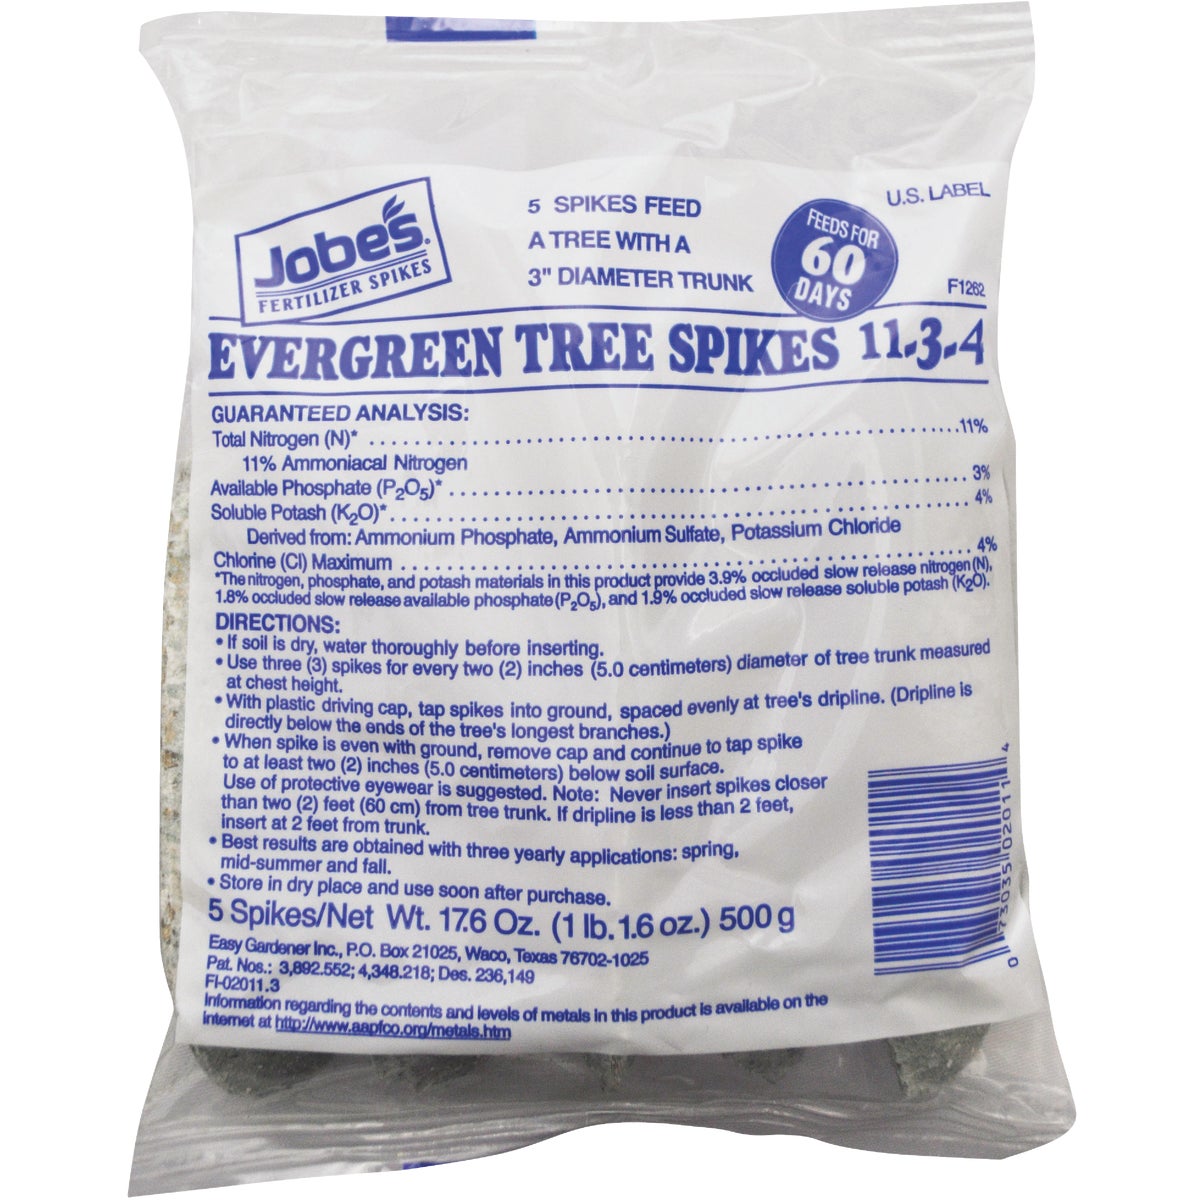 Item 703982, Fertilizer stakes specially formulated for evergreen trees that ensure a 